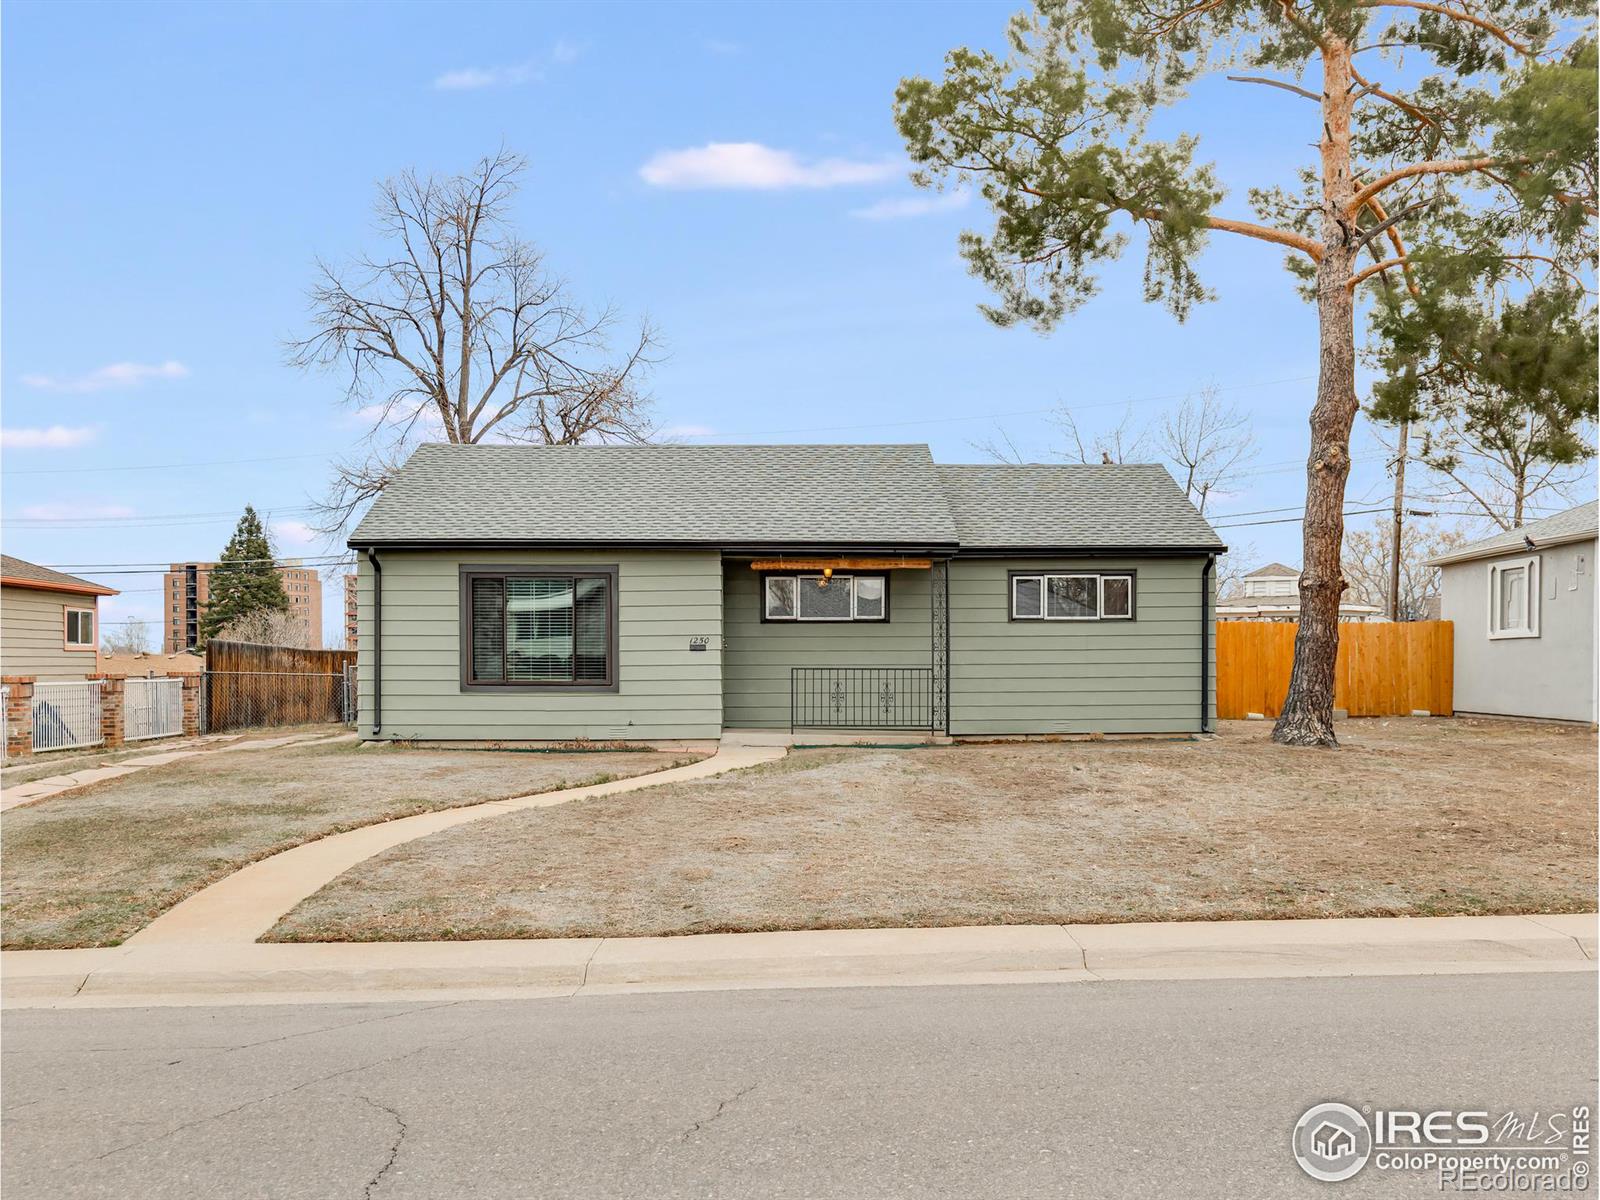 1250 s tejon street, Denver sold home. Closed on 2023-05-16 for $420,500.